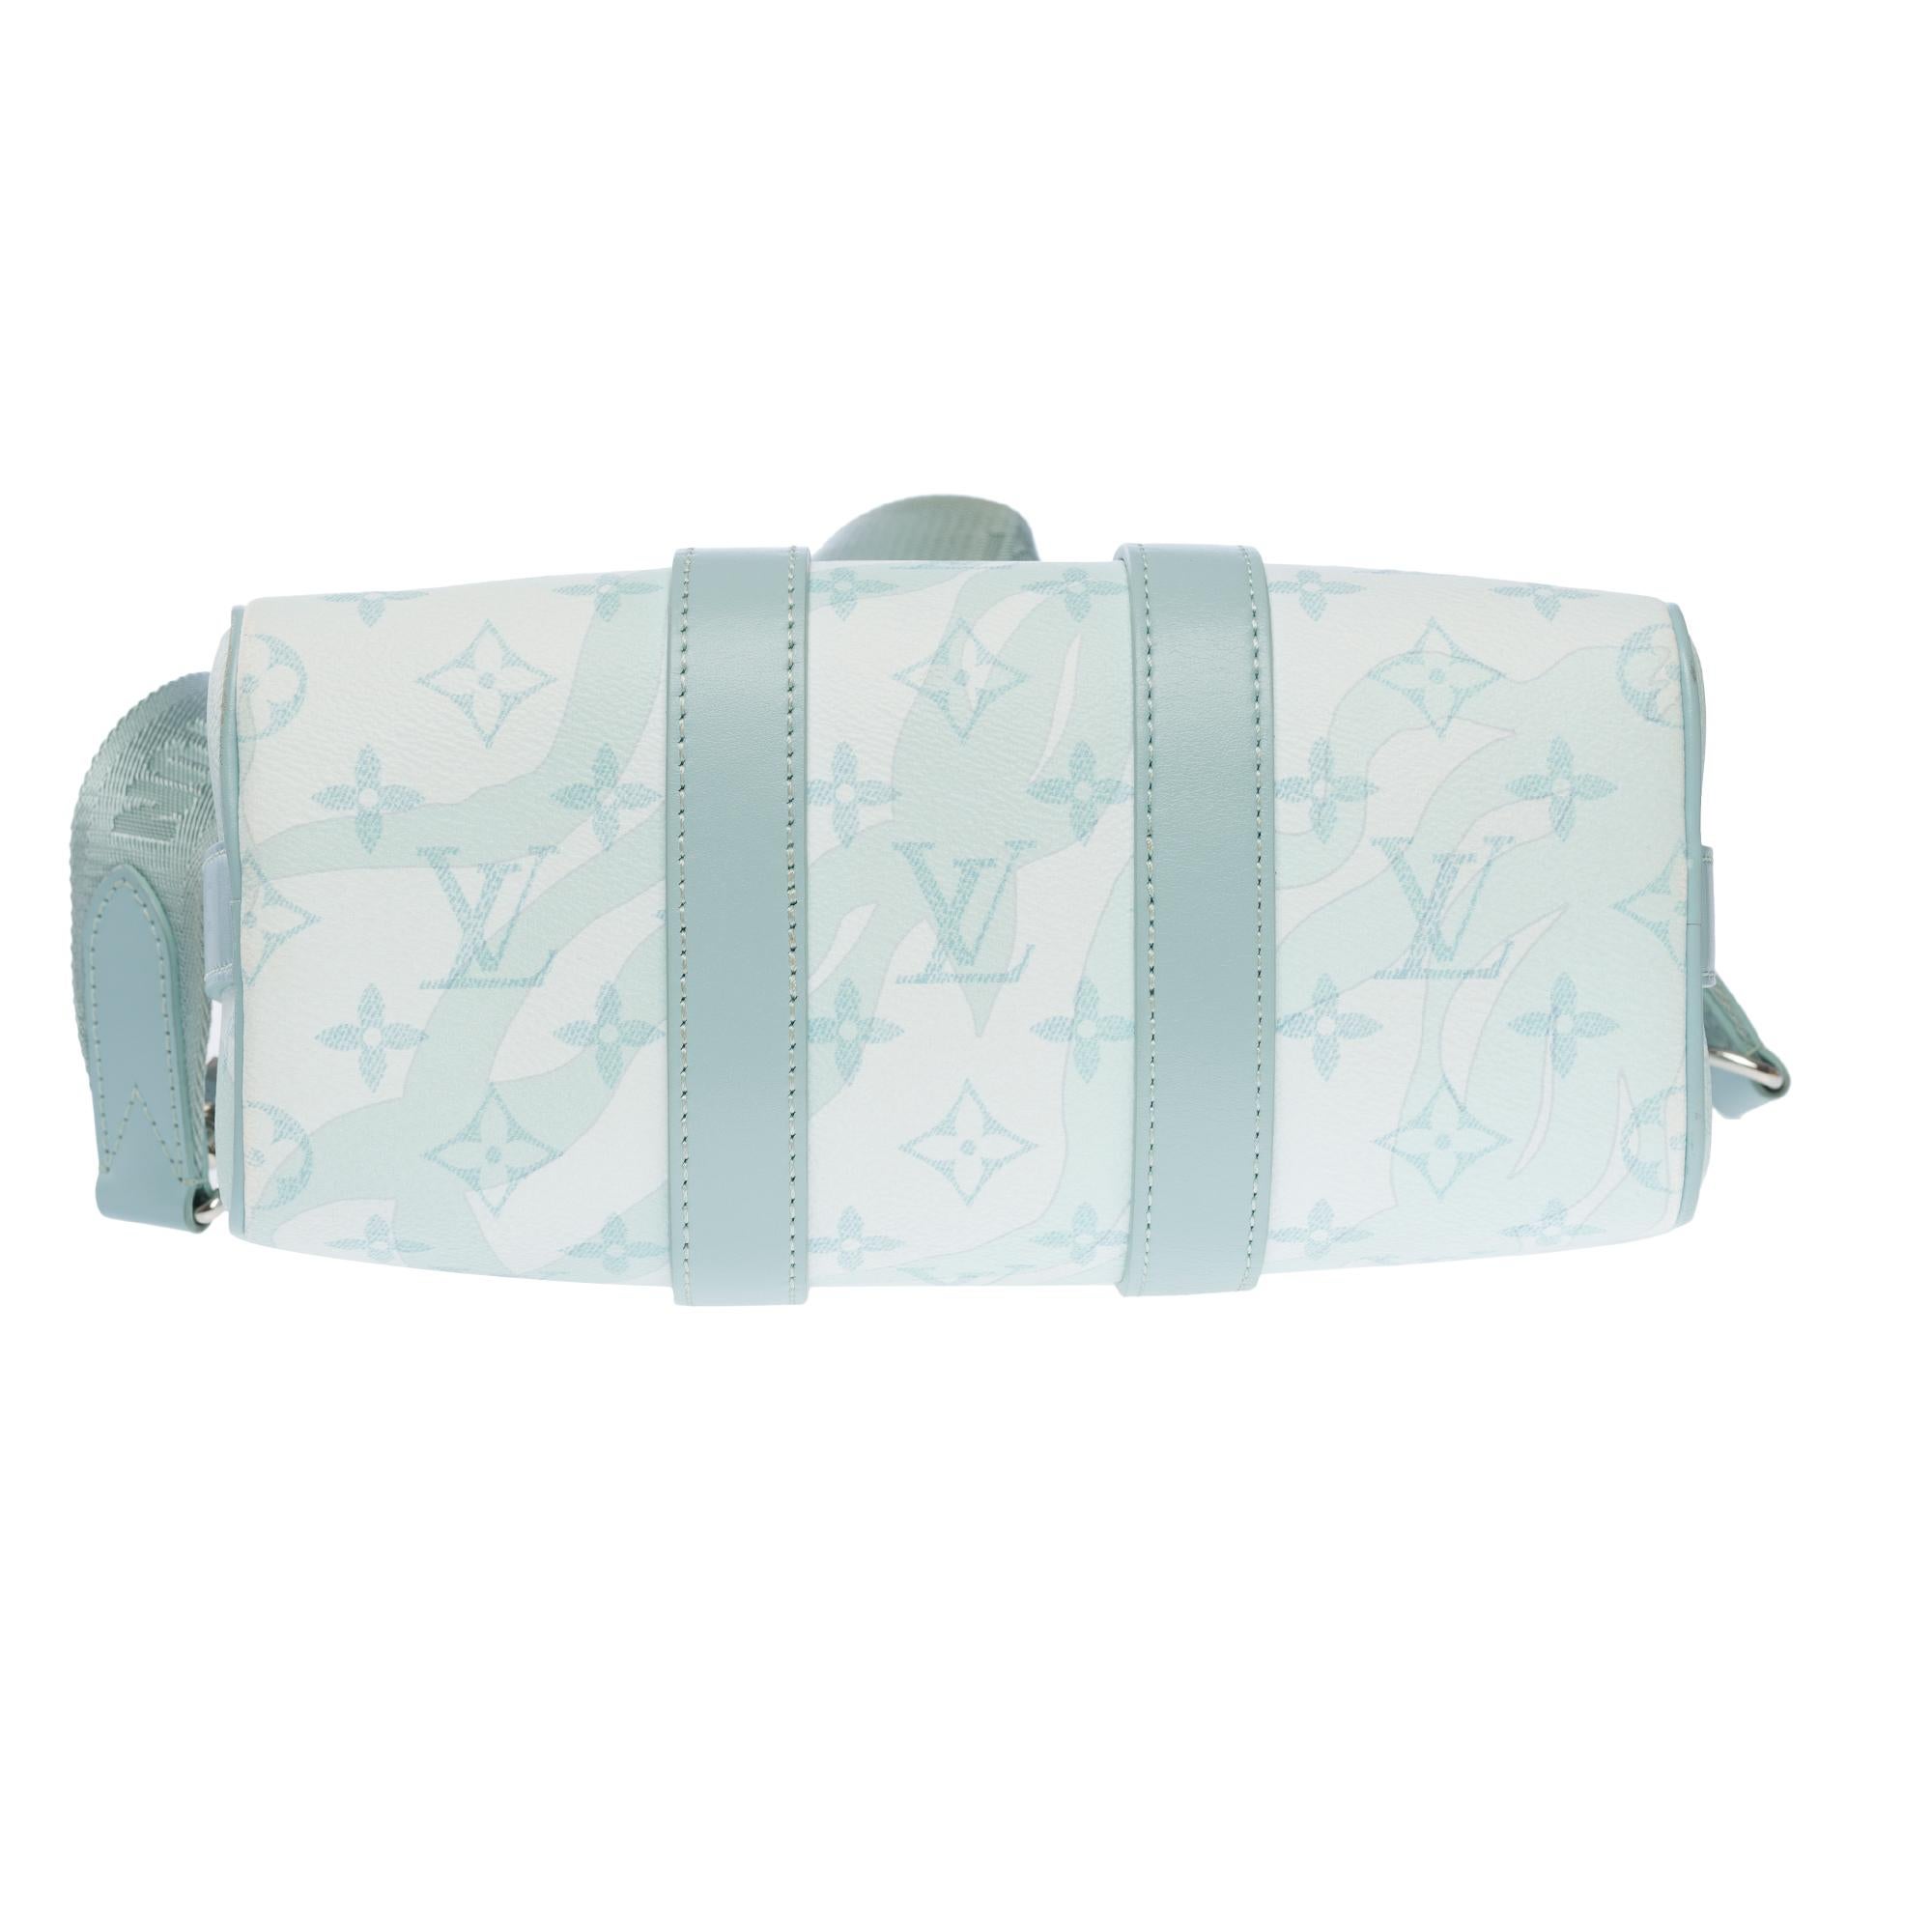 Louis Vuitton AquaGarden keepall 25 strap in crystal blue monogram canvas, SHW For Sale 5